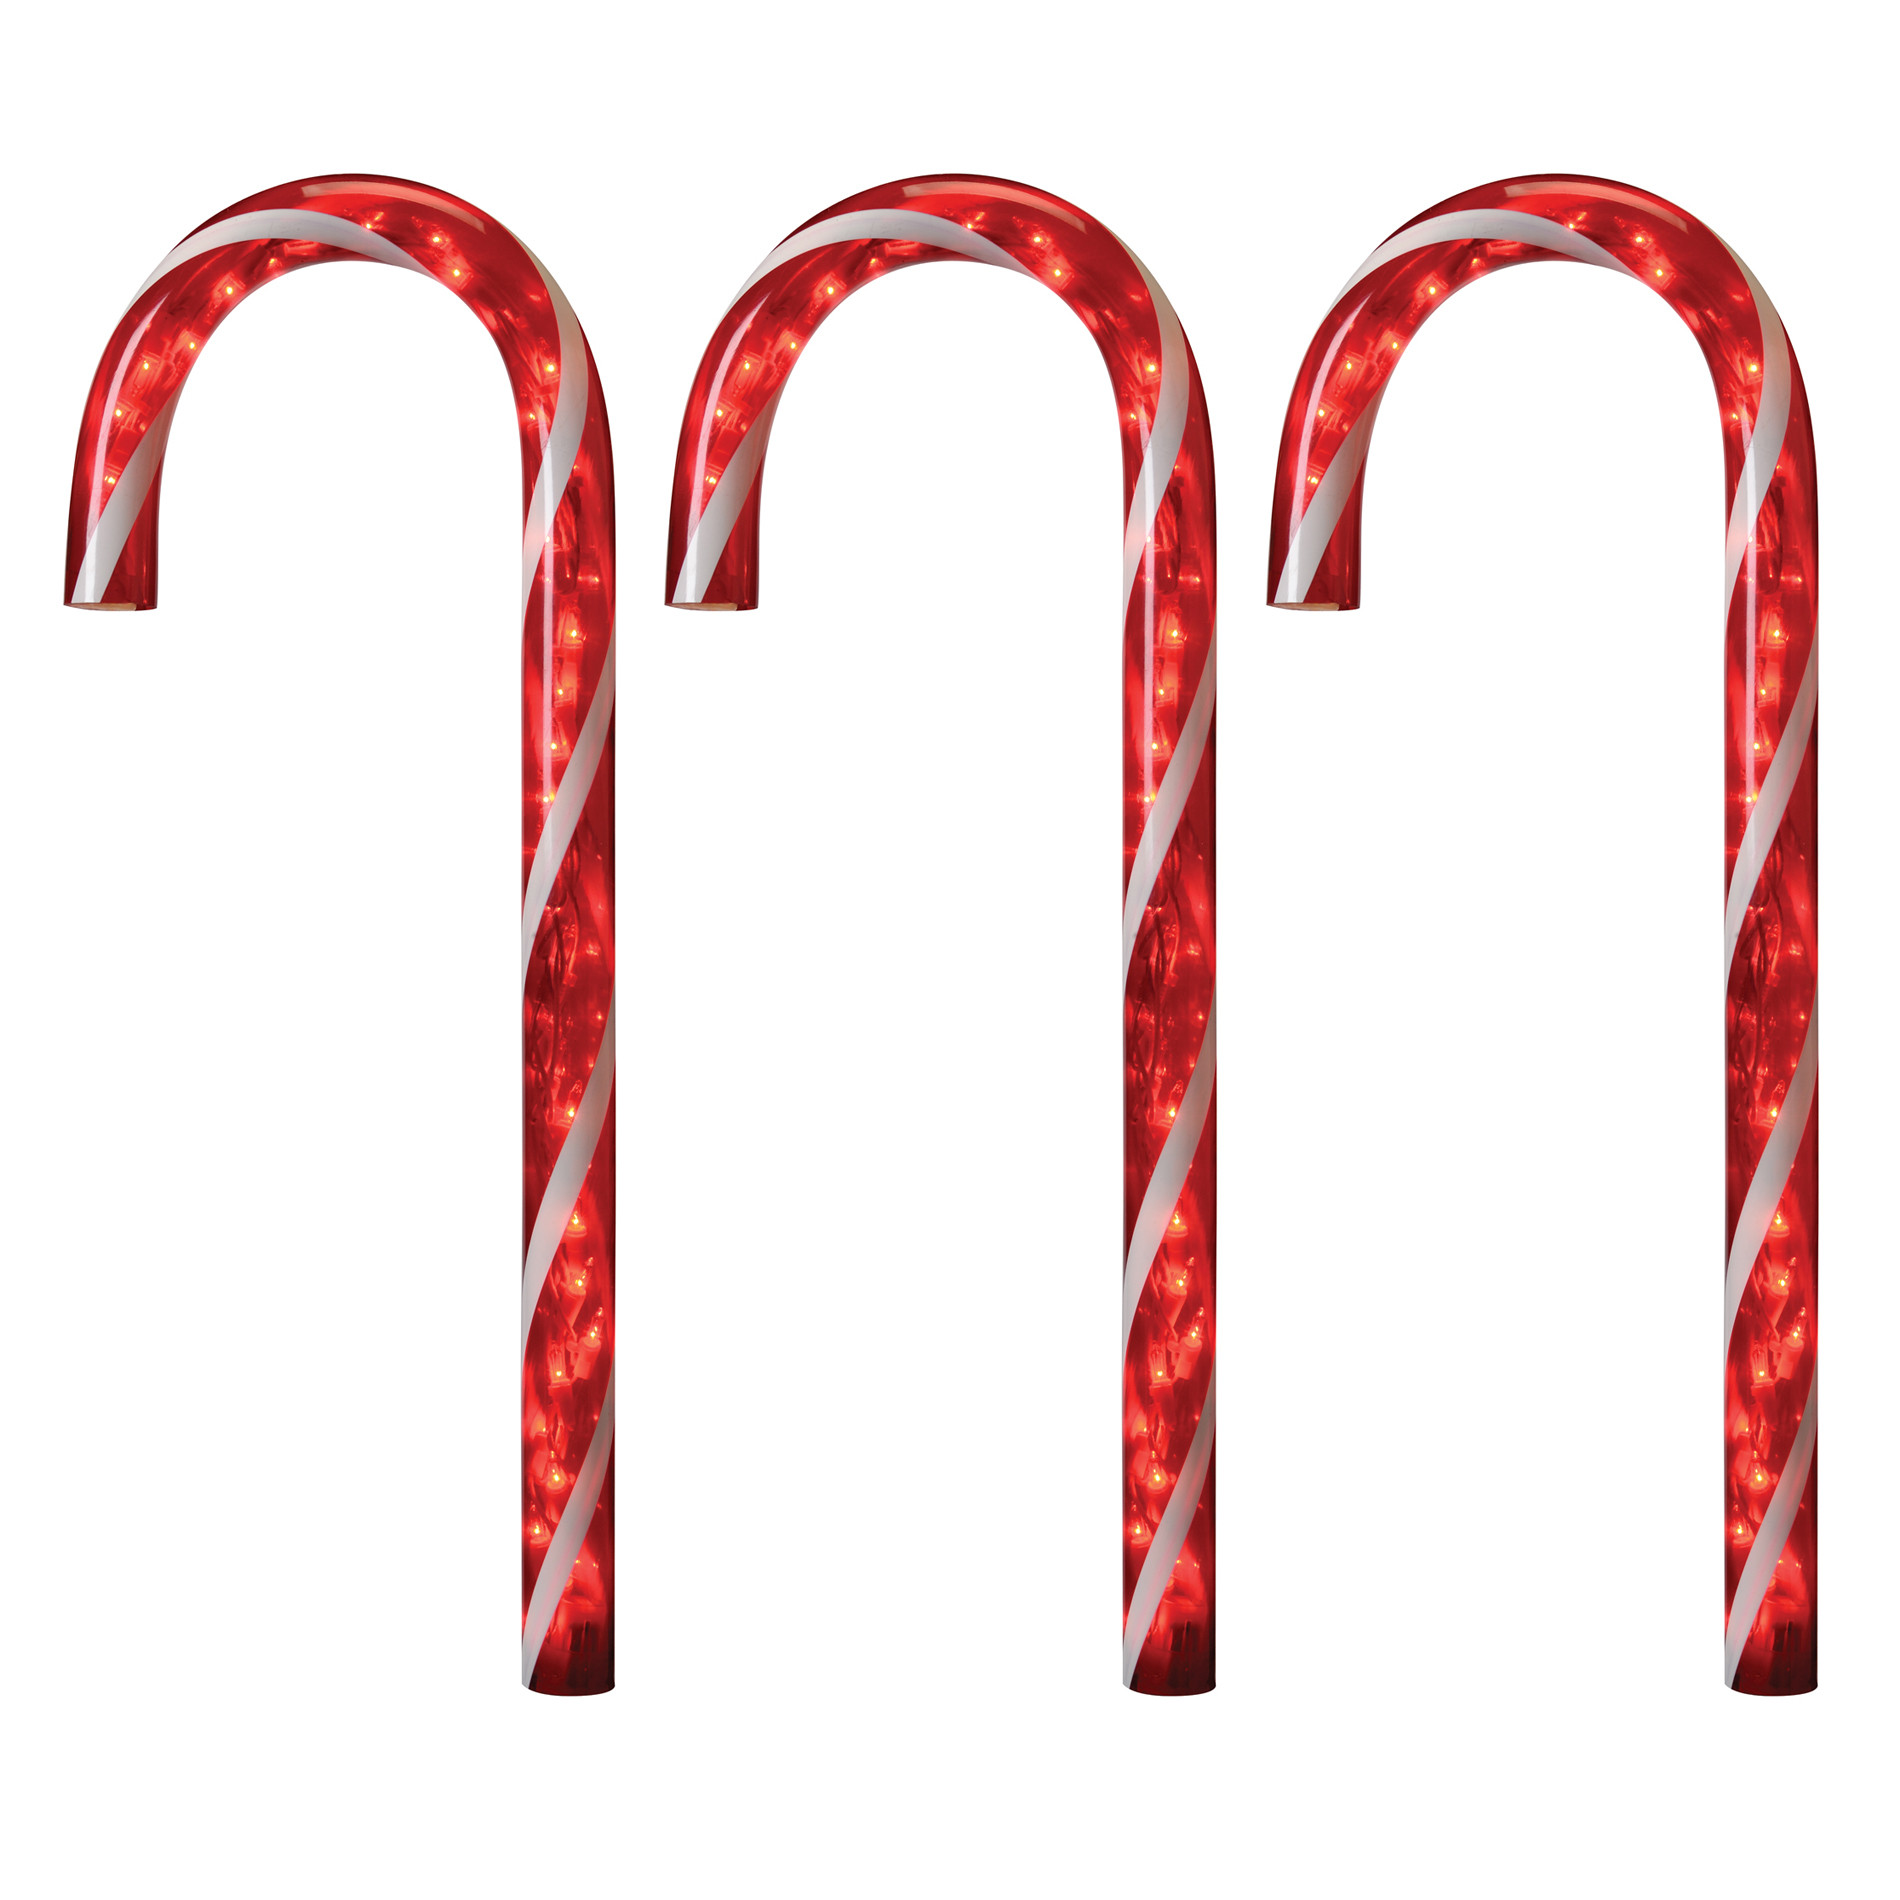 Christmas Candy Cane Lights
 24" Candy Cane Pathway Christmas Lights Enjoy a Sweet